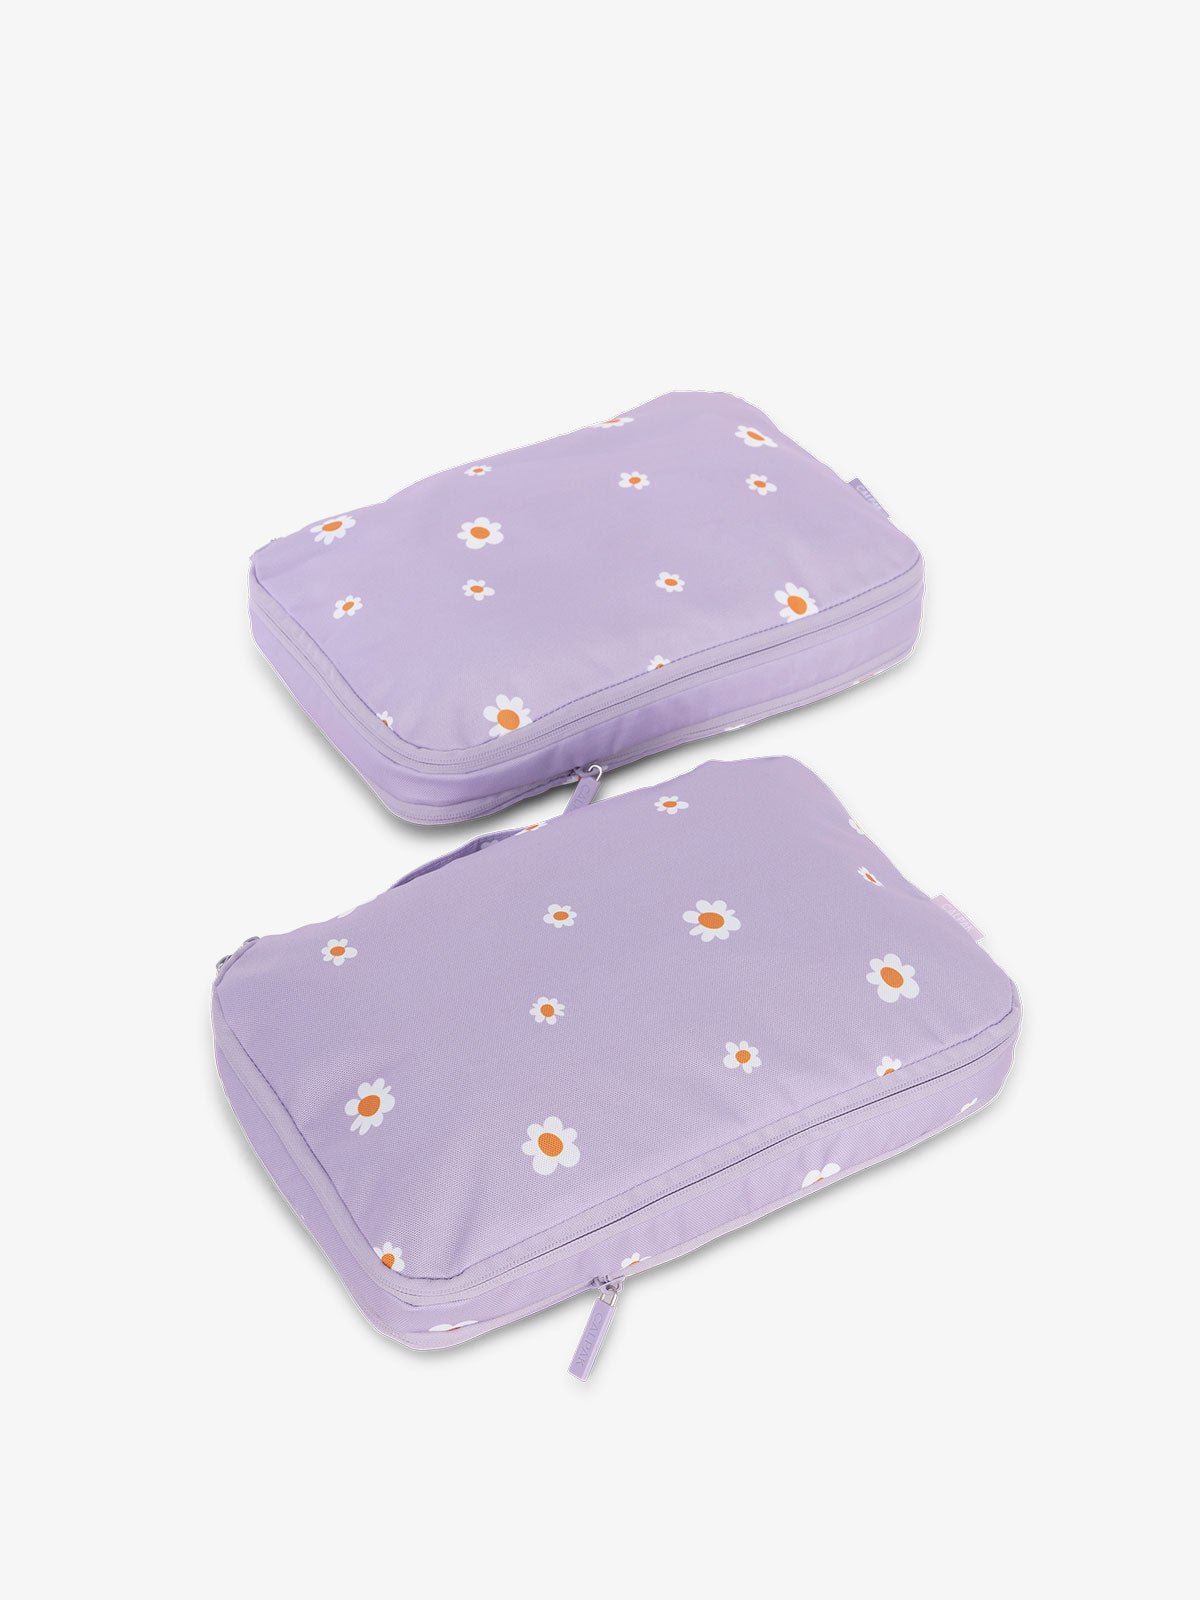 CALPAK compression packing cubes in orchid fields